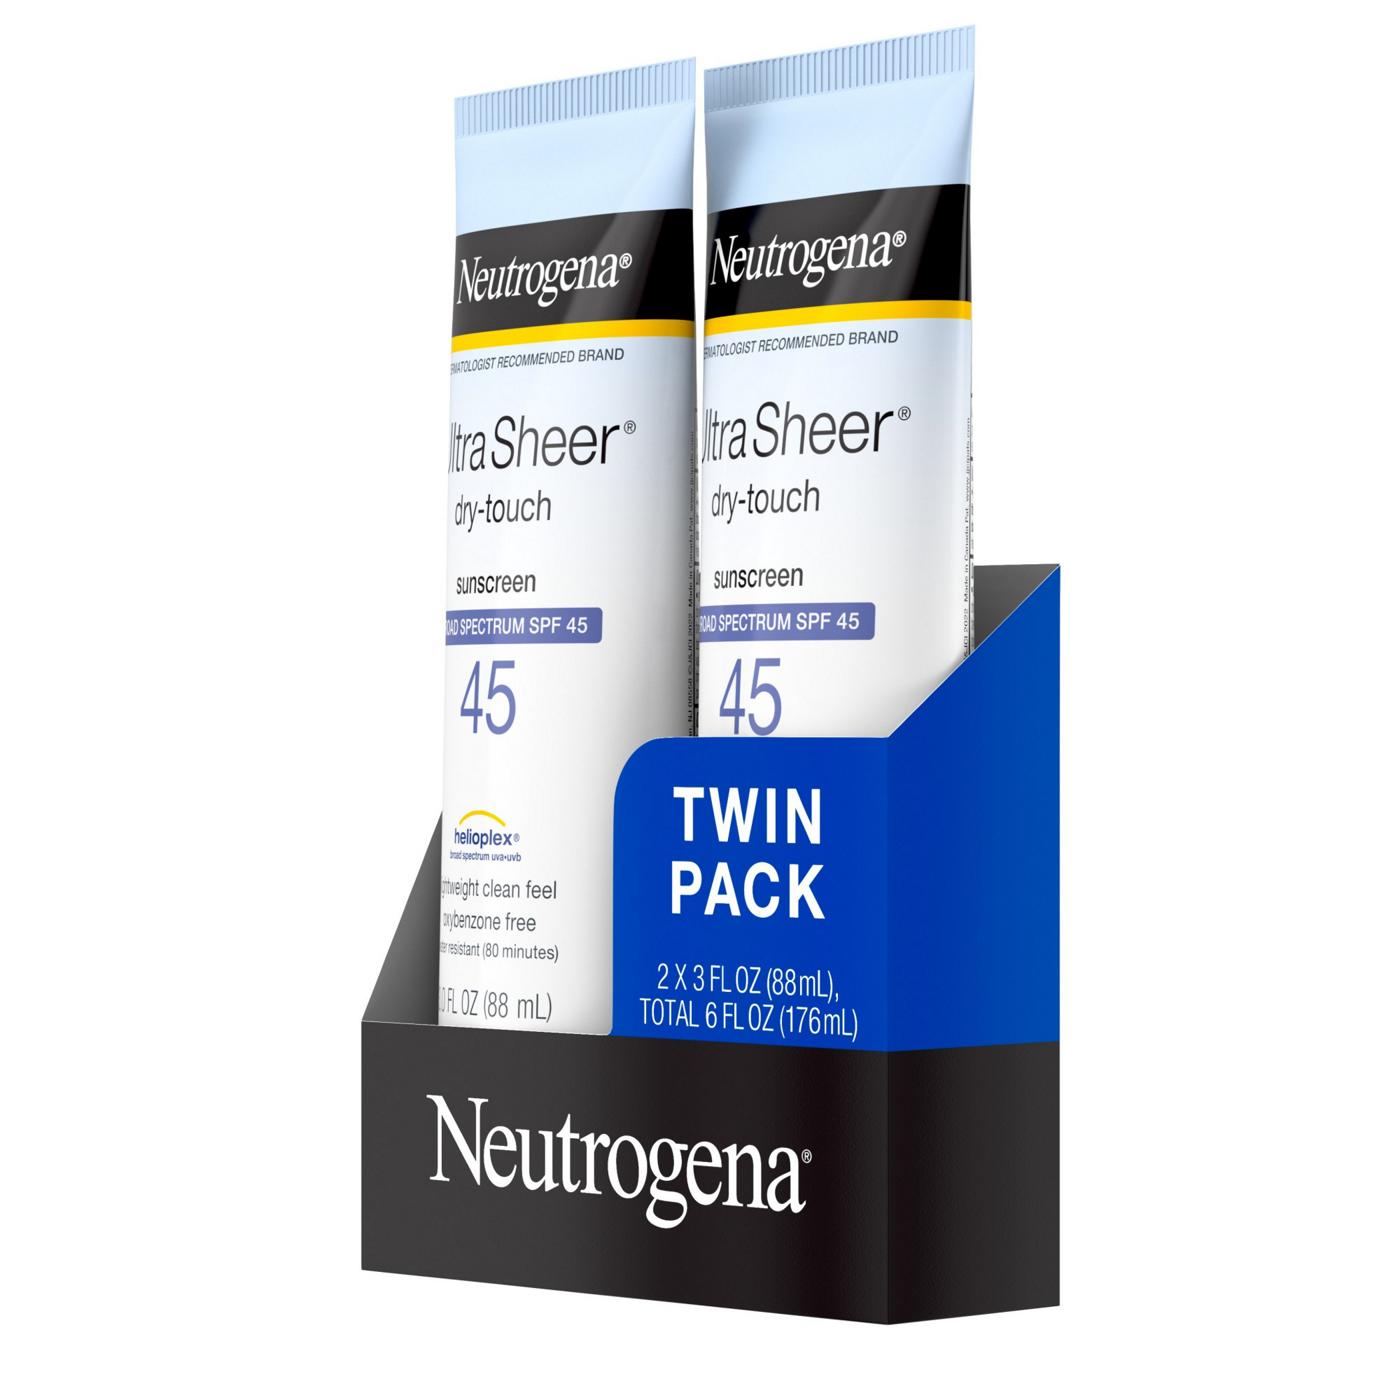 Neutrogena Ultra Sheer Dry-Touch Sunscreen Twin Pack - SPF 45; image 5 of 8